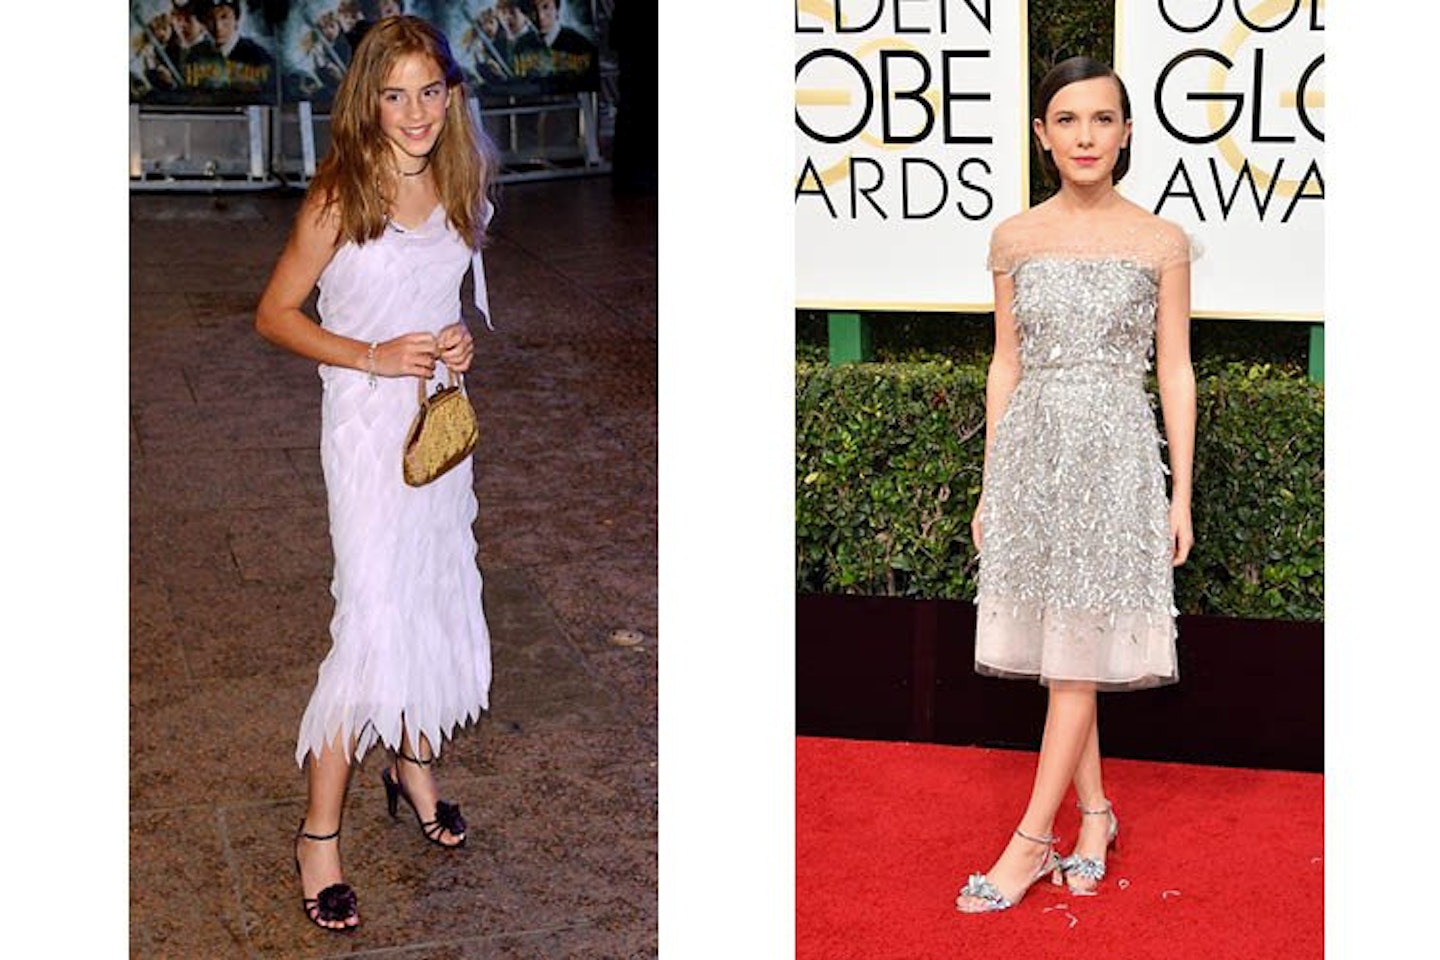 Young Emma Watson VS Millie Bobby Brown Style Fashion Throwback Dress